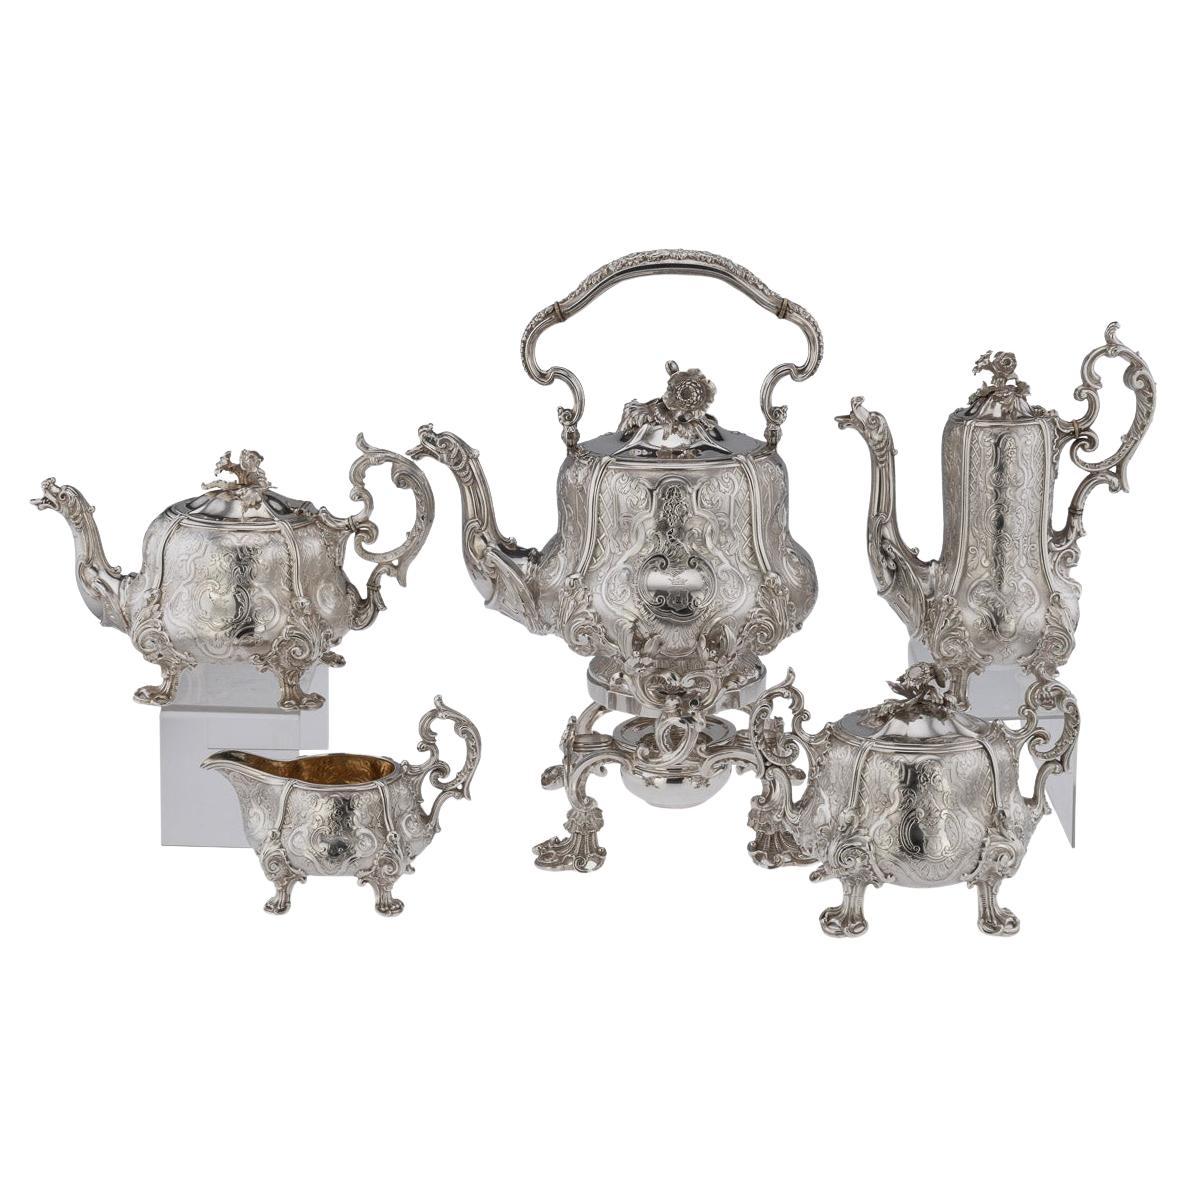 19th Century French Solid Silver Five Piece Tea & Coffee Service, Odiot, c.1870